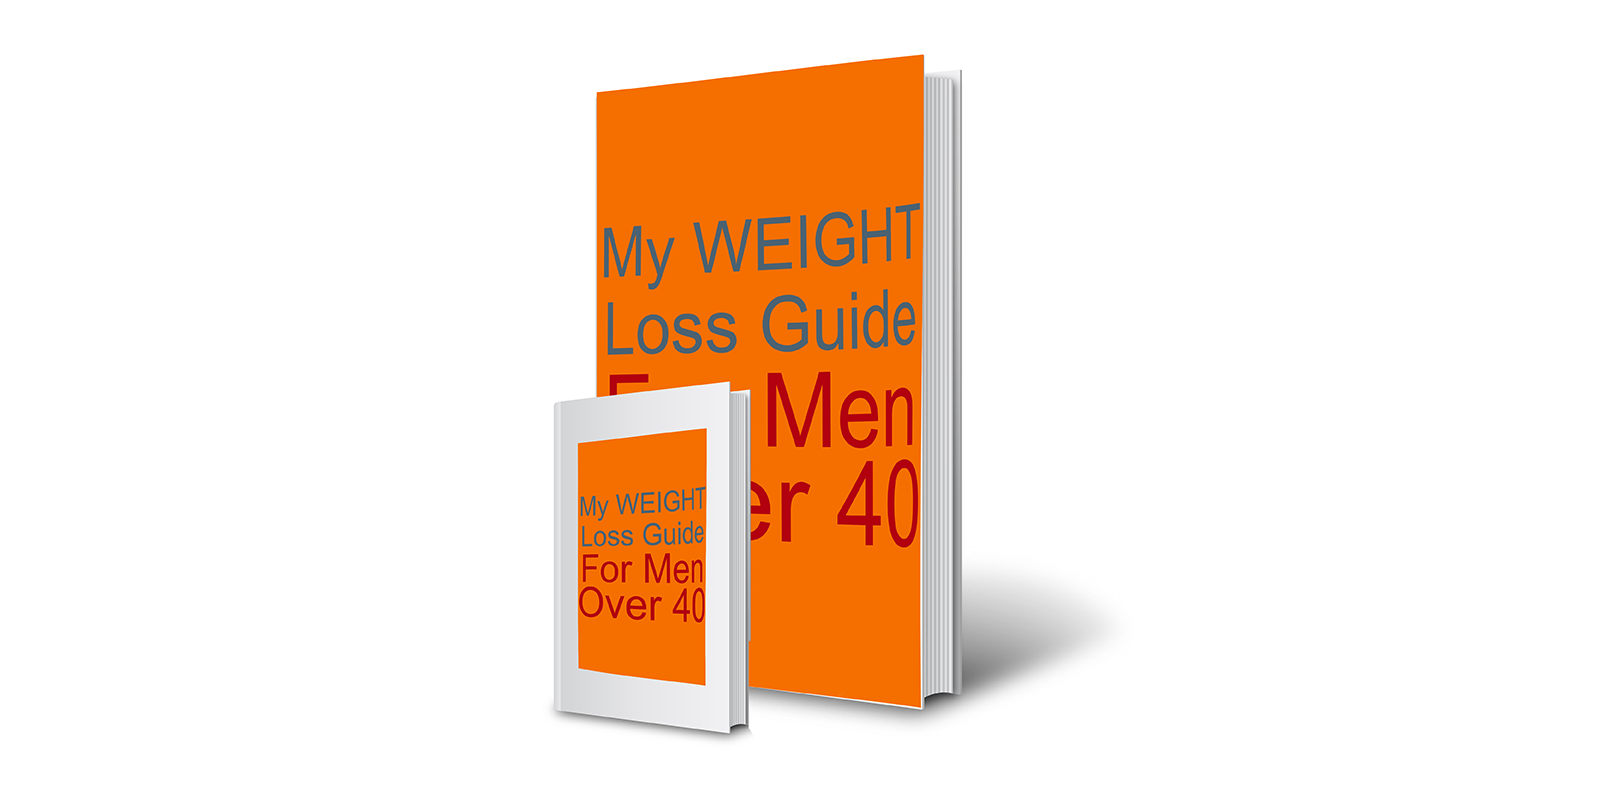 Weight Loss Guide For Men Over 40 review